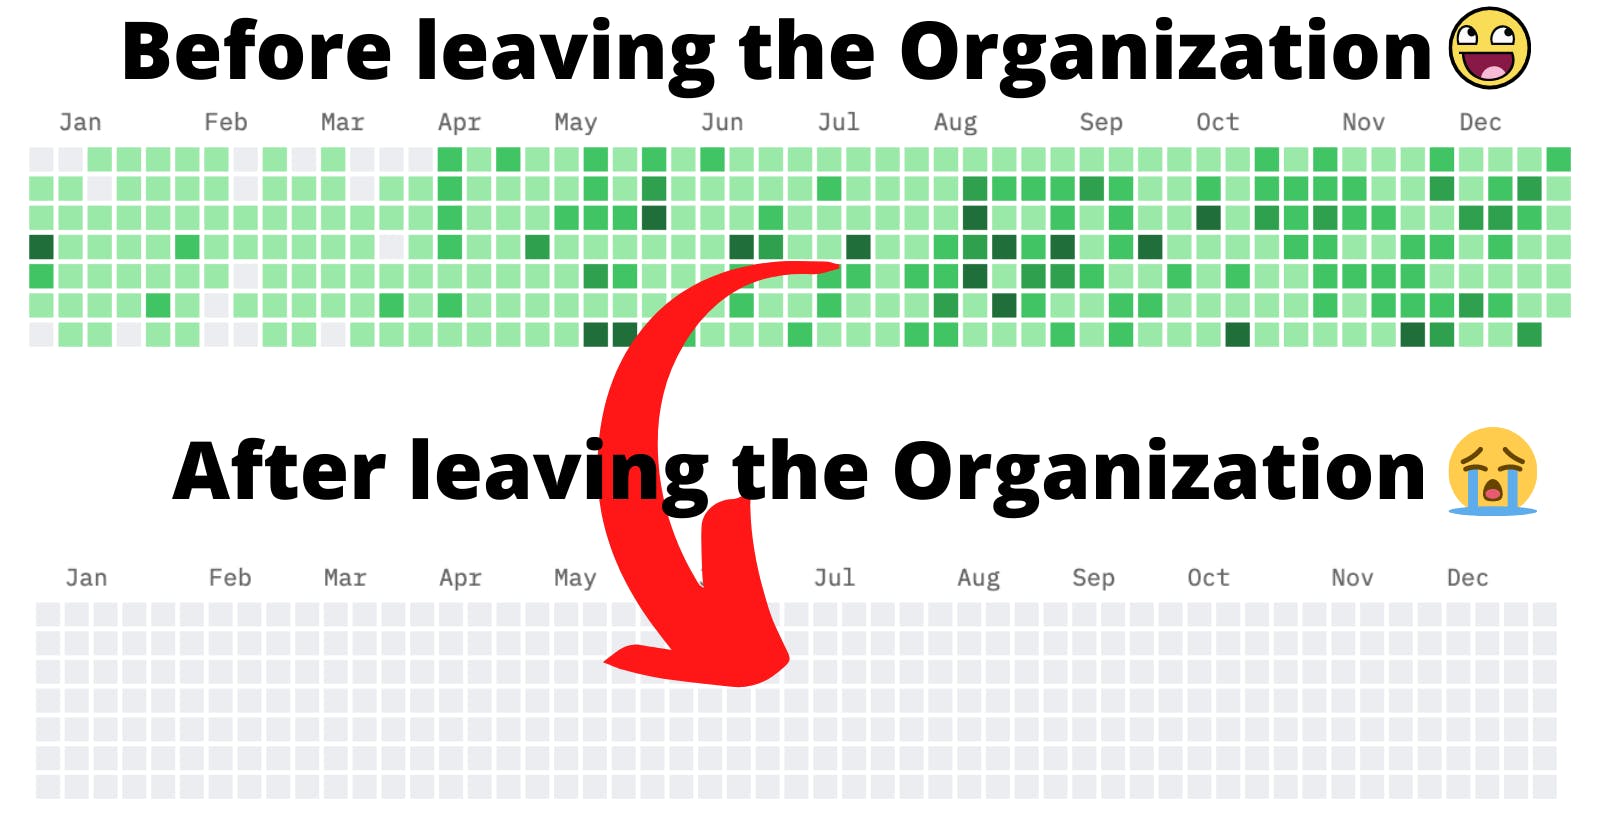 Don't lose your Github contributions when you leave an organization